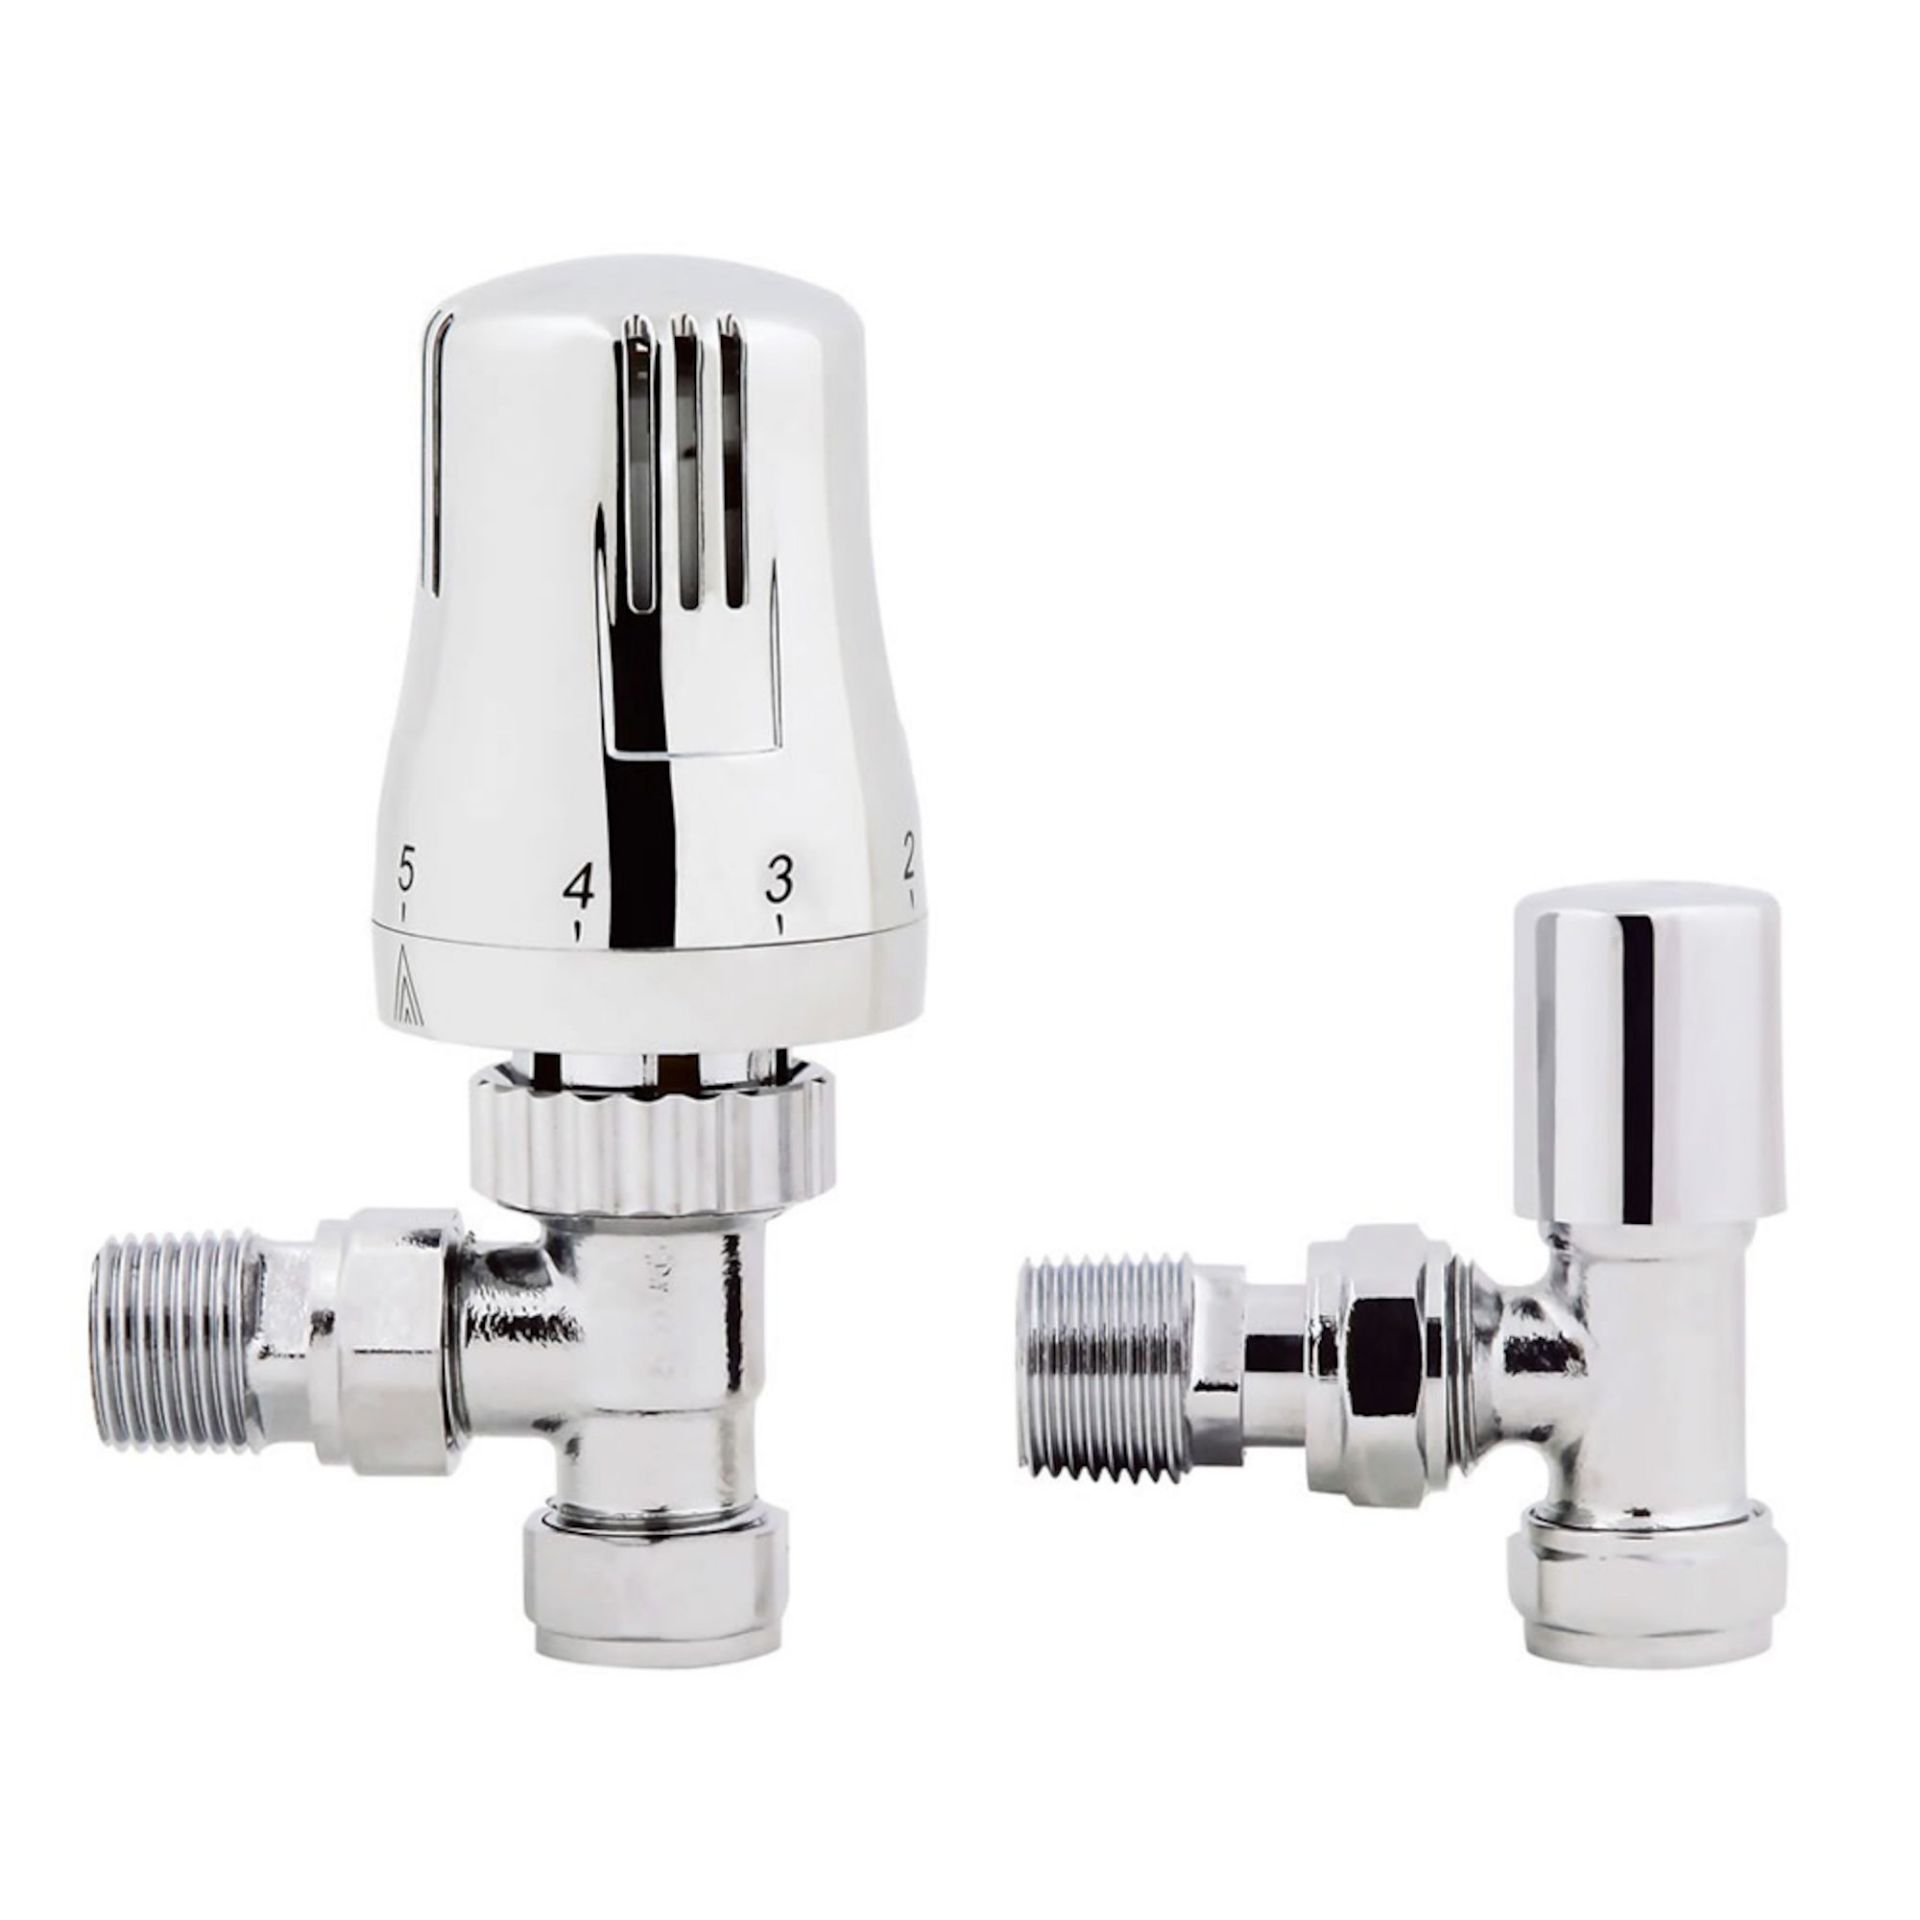 (LU106) 15mm Standard Connection Thermostatic Angled Chrome Radiator Valves Chrome Plated Solid